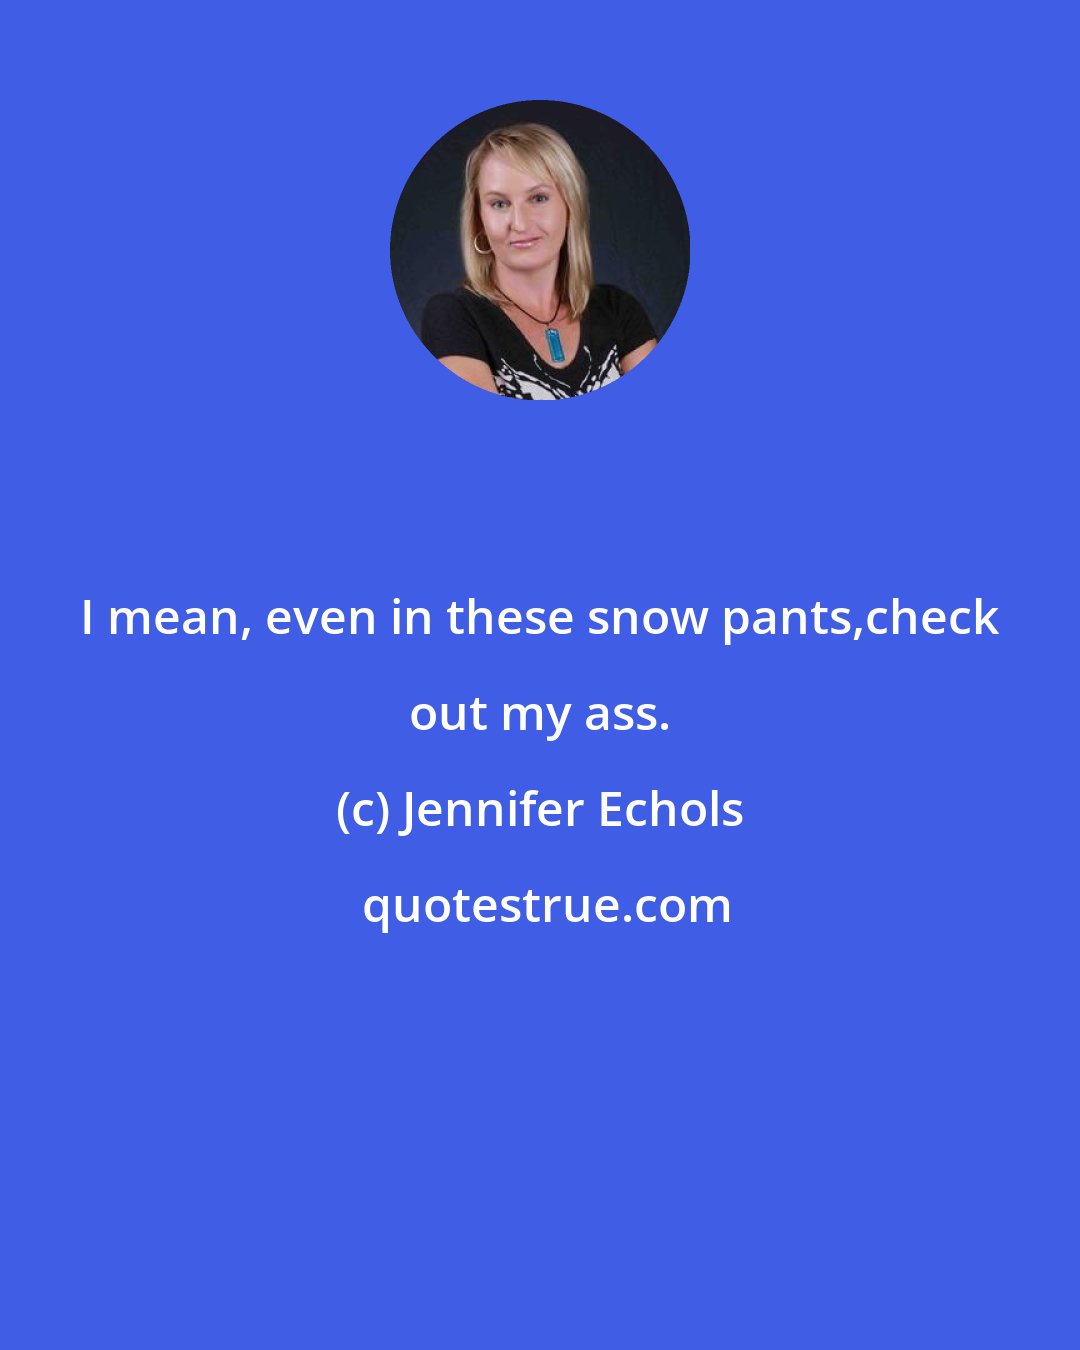 Jennifer Echols: I mean, even in these snow pants,check out my ass.